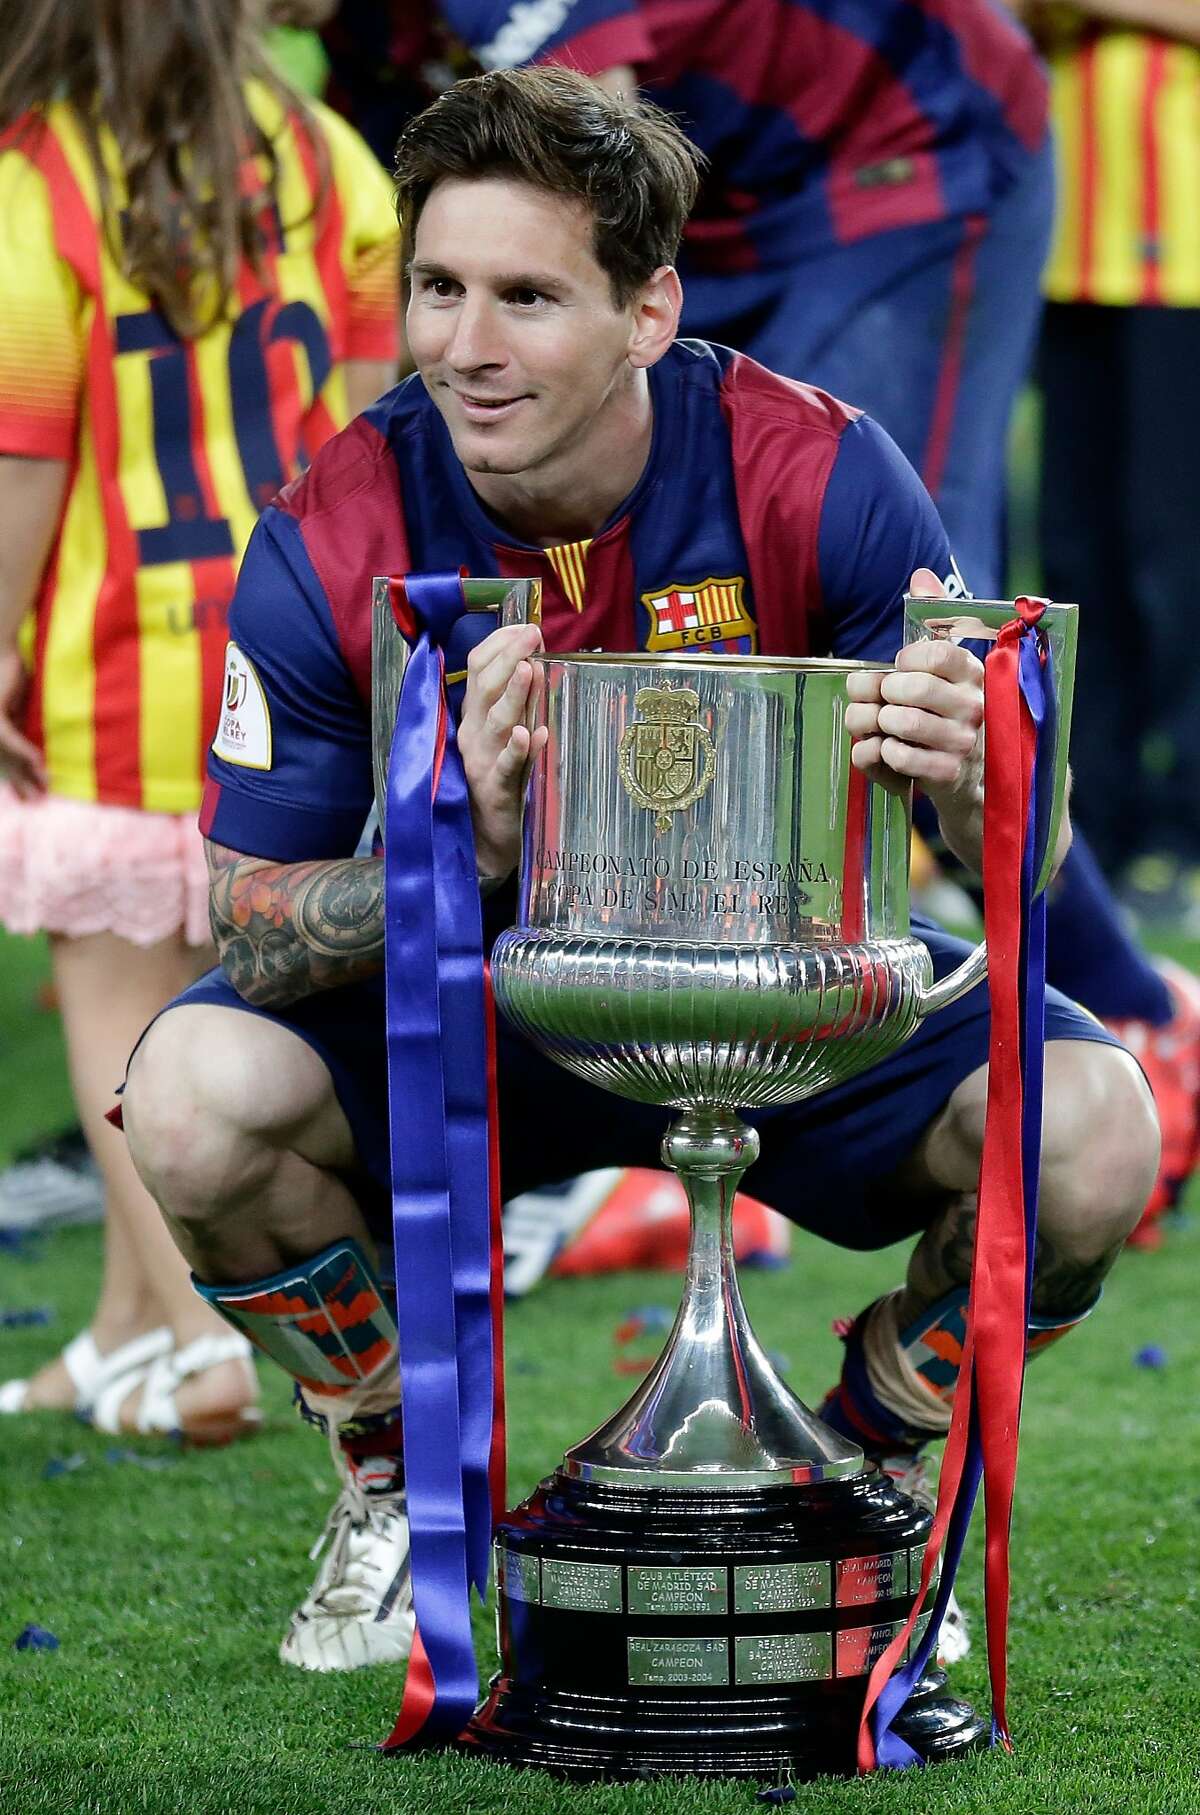 Barcelona's Lionel Messi poses with the trophy after winning the final of the Copa del Rey soccer match between FC Barcelona and Athletic Bilbao at the Camp Nou stadium in Barcelona, Spain, Saturday, May 30, 2015. (AP Photo/Manu Fernandez)